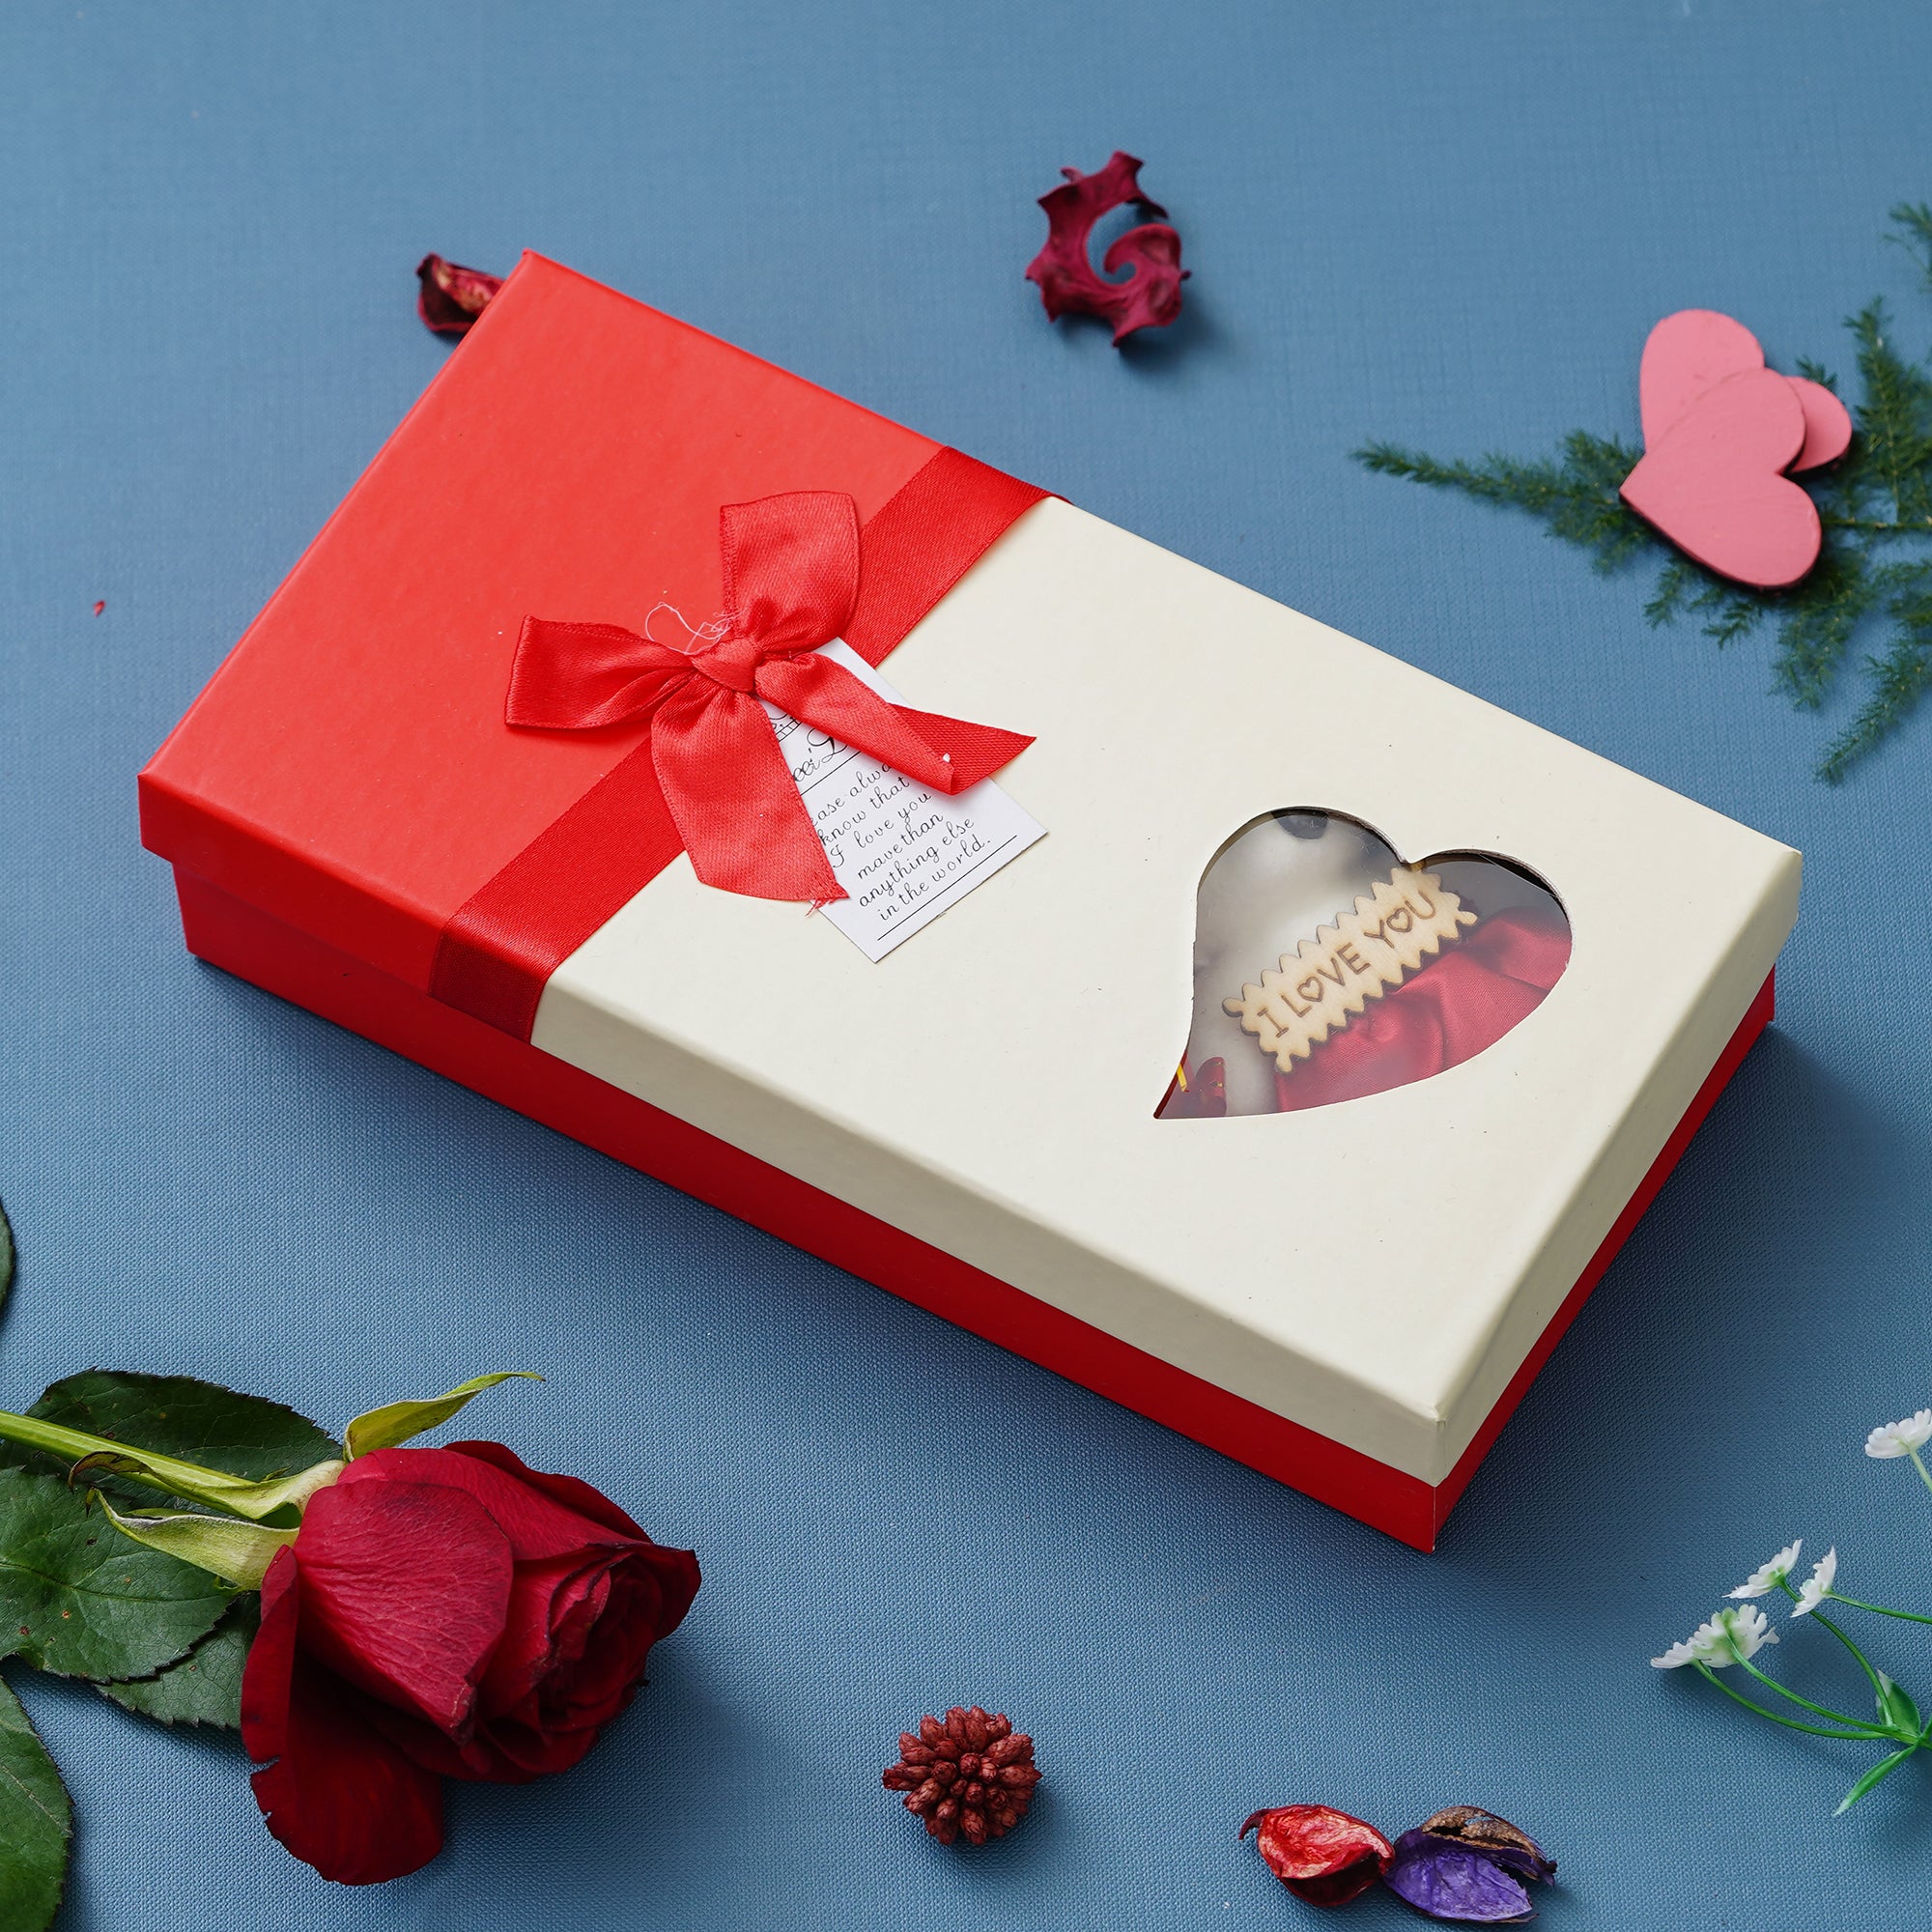 Red Roses Bouqet with White & Red Teddy Bear Valentine's Square Shaped Gift Box 1